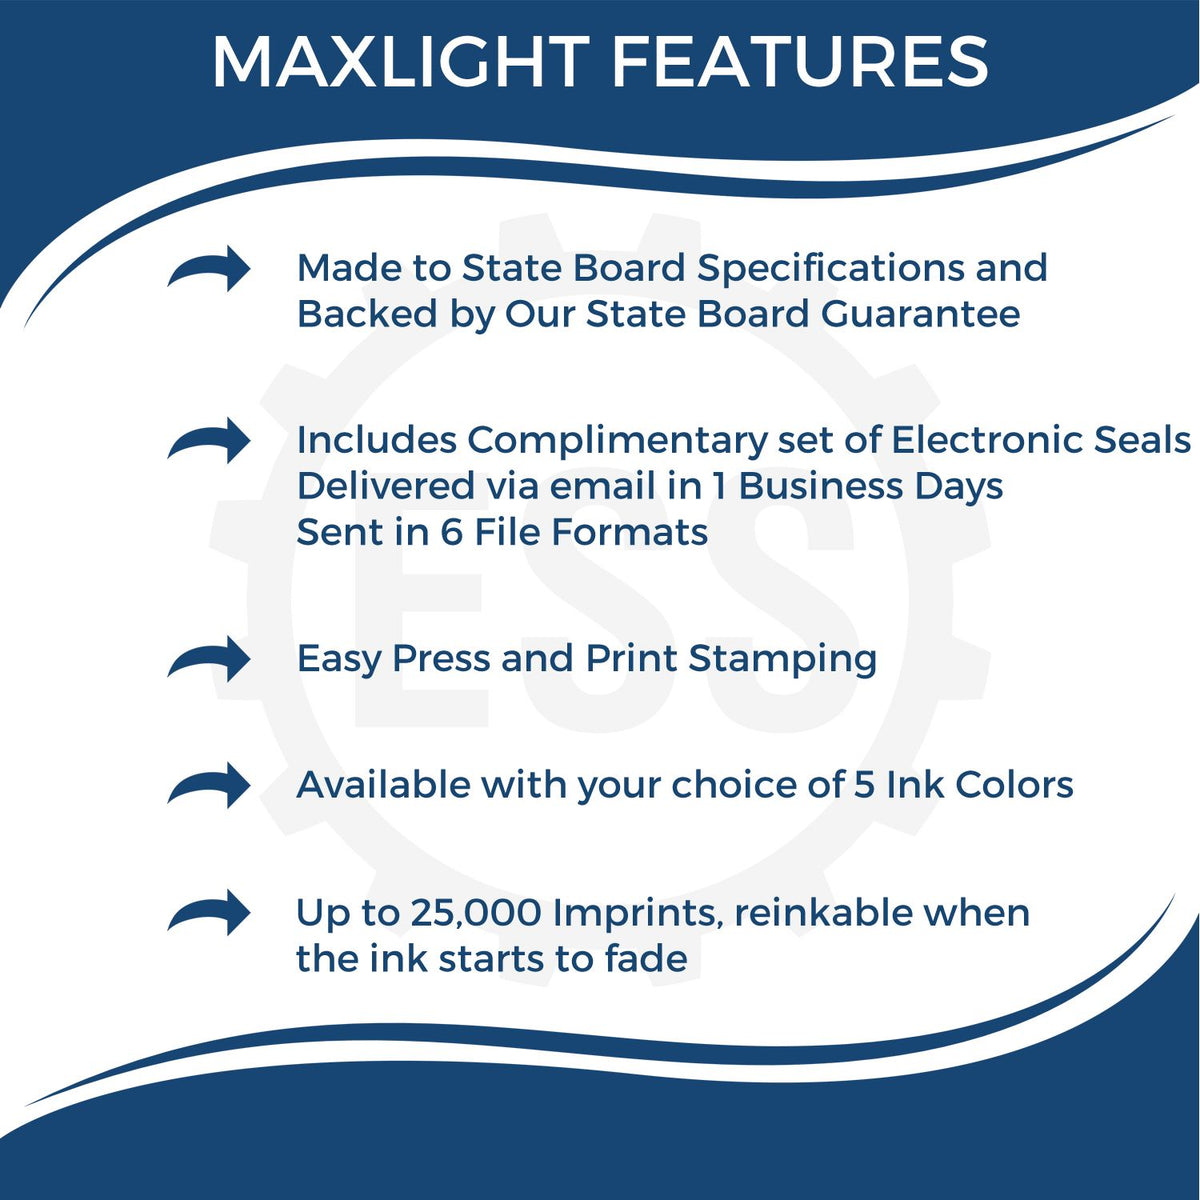 A picture of an infographic highlighting the selling points for the MaxLight Premium Pre-Inked North Carolina State Seal Notarial Stamp